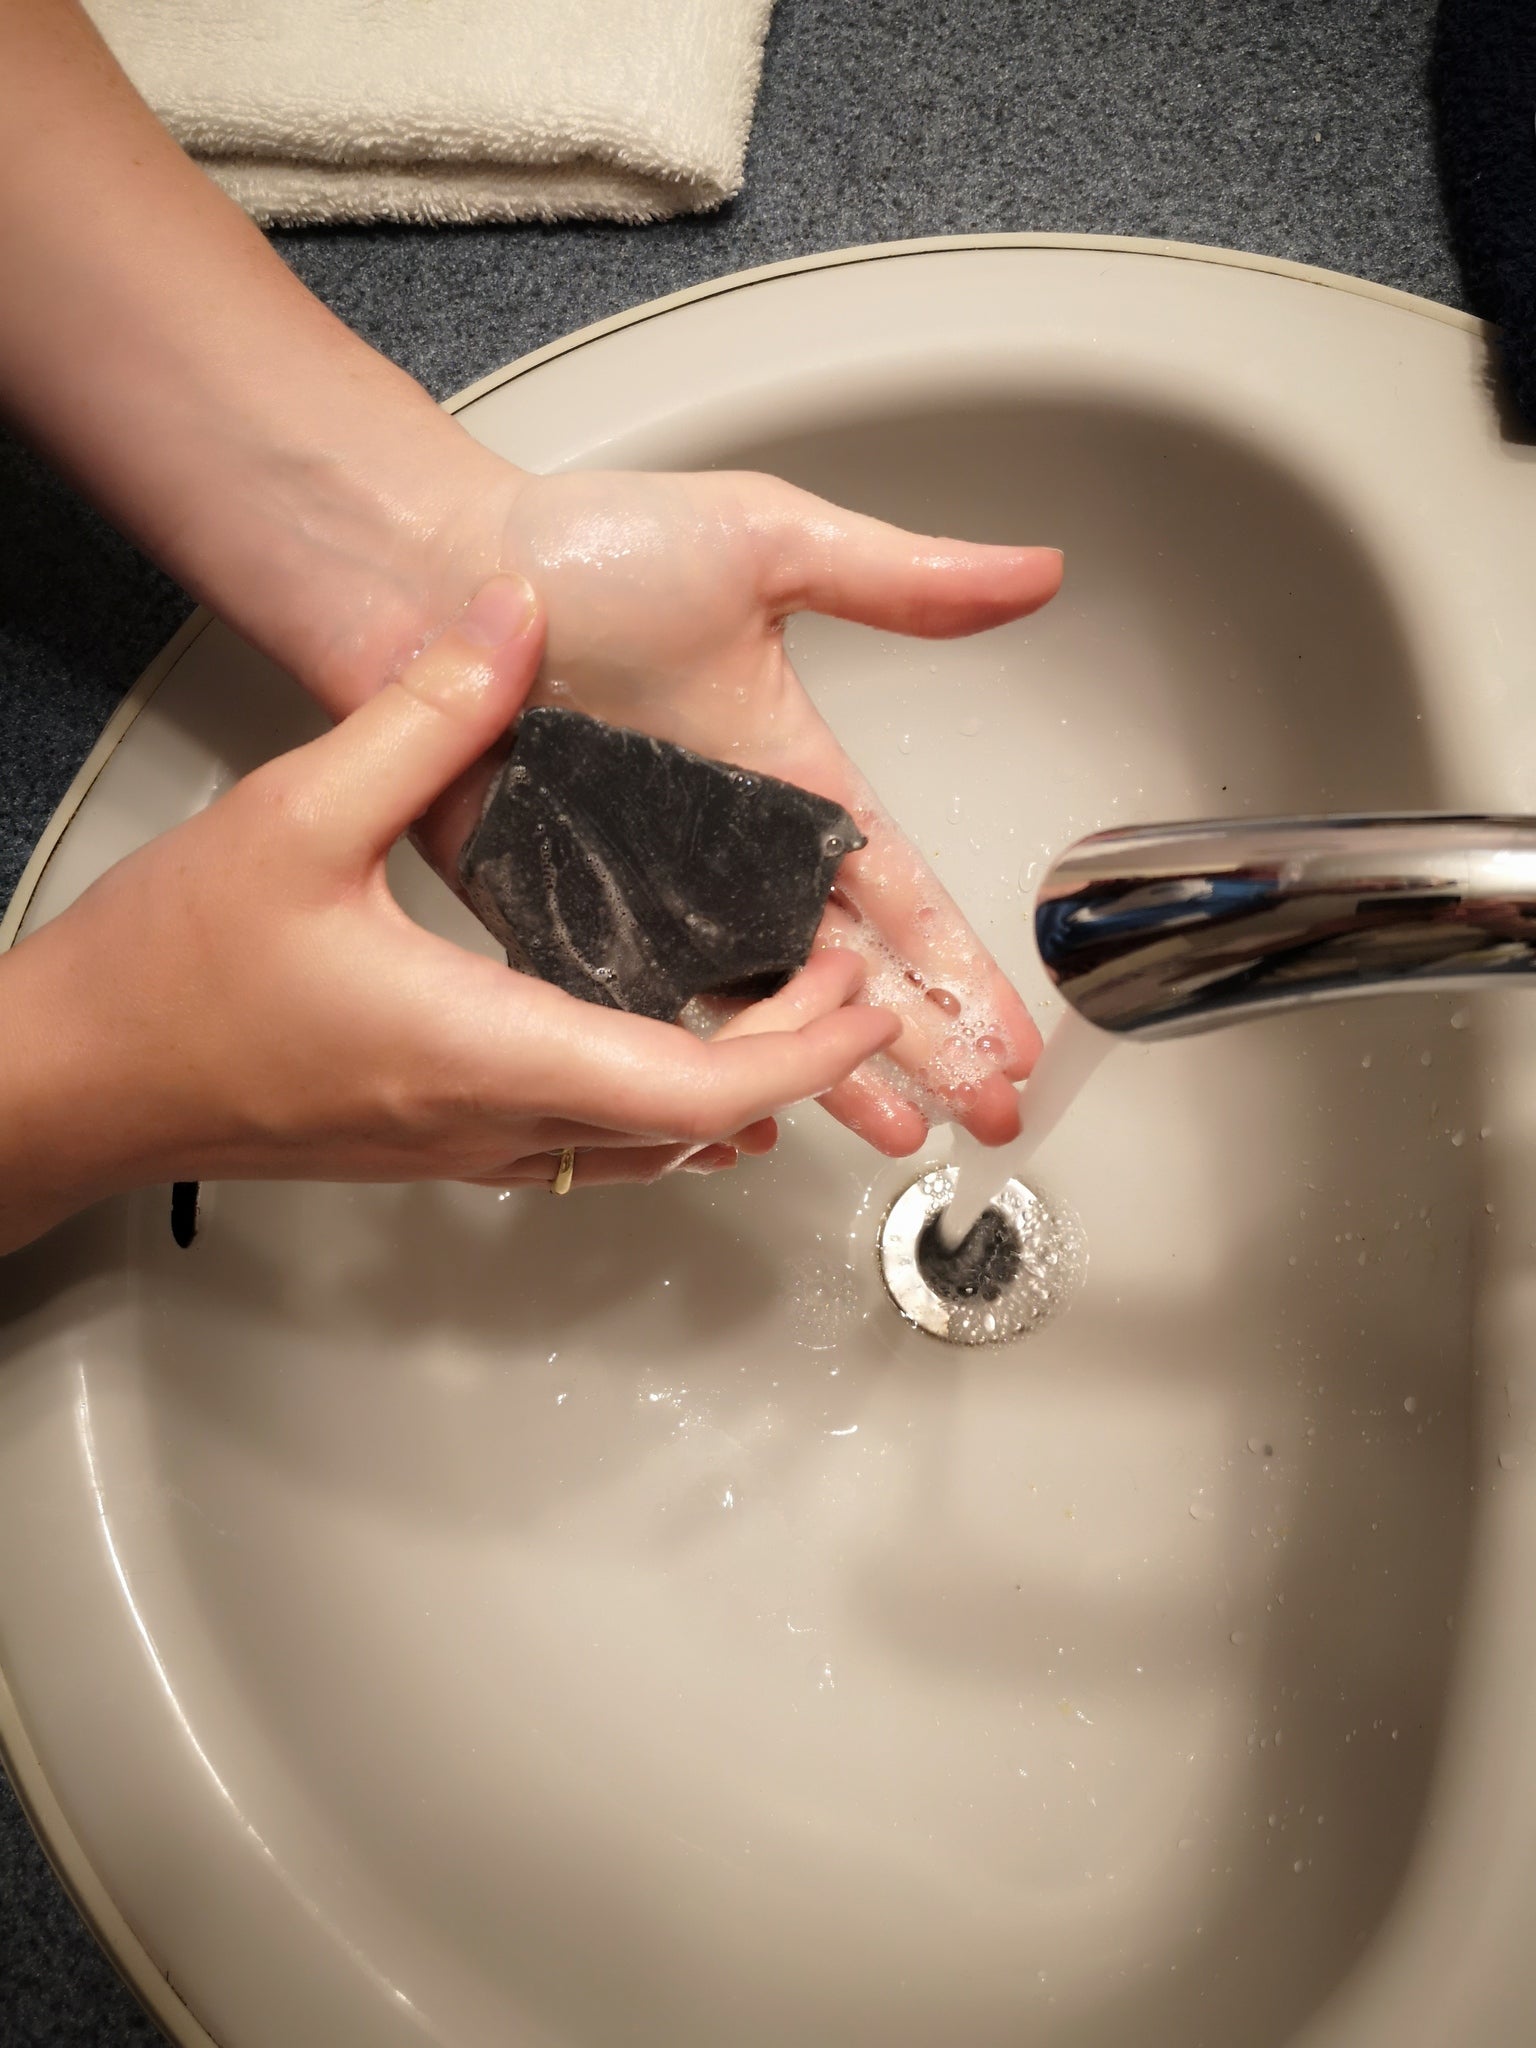 Overwashing with soap is one of the causes of dry skin and is shown in this image with a woman washing her hands.